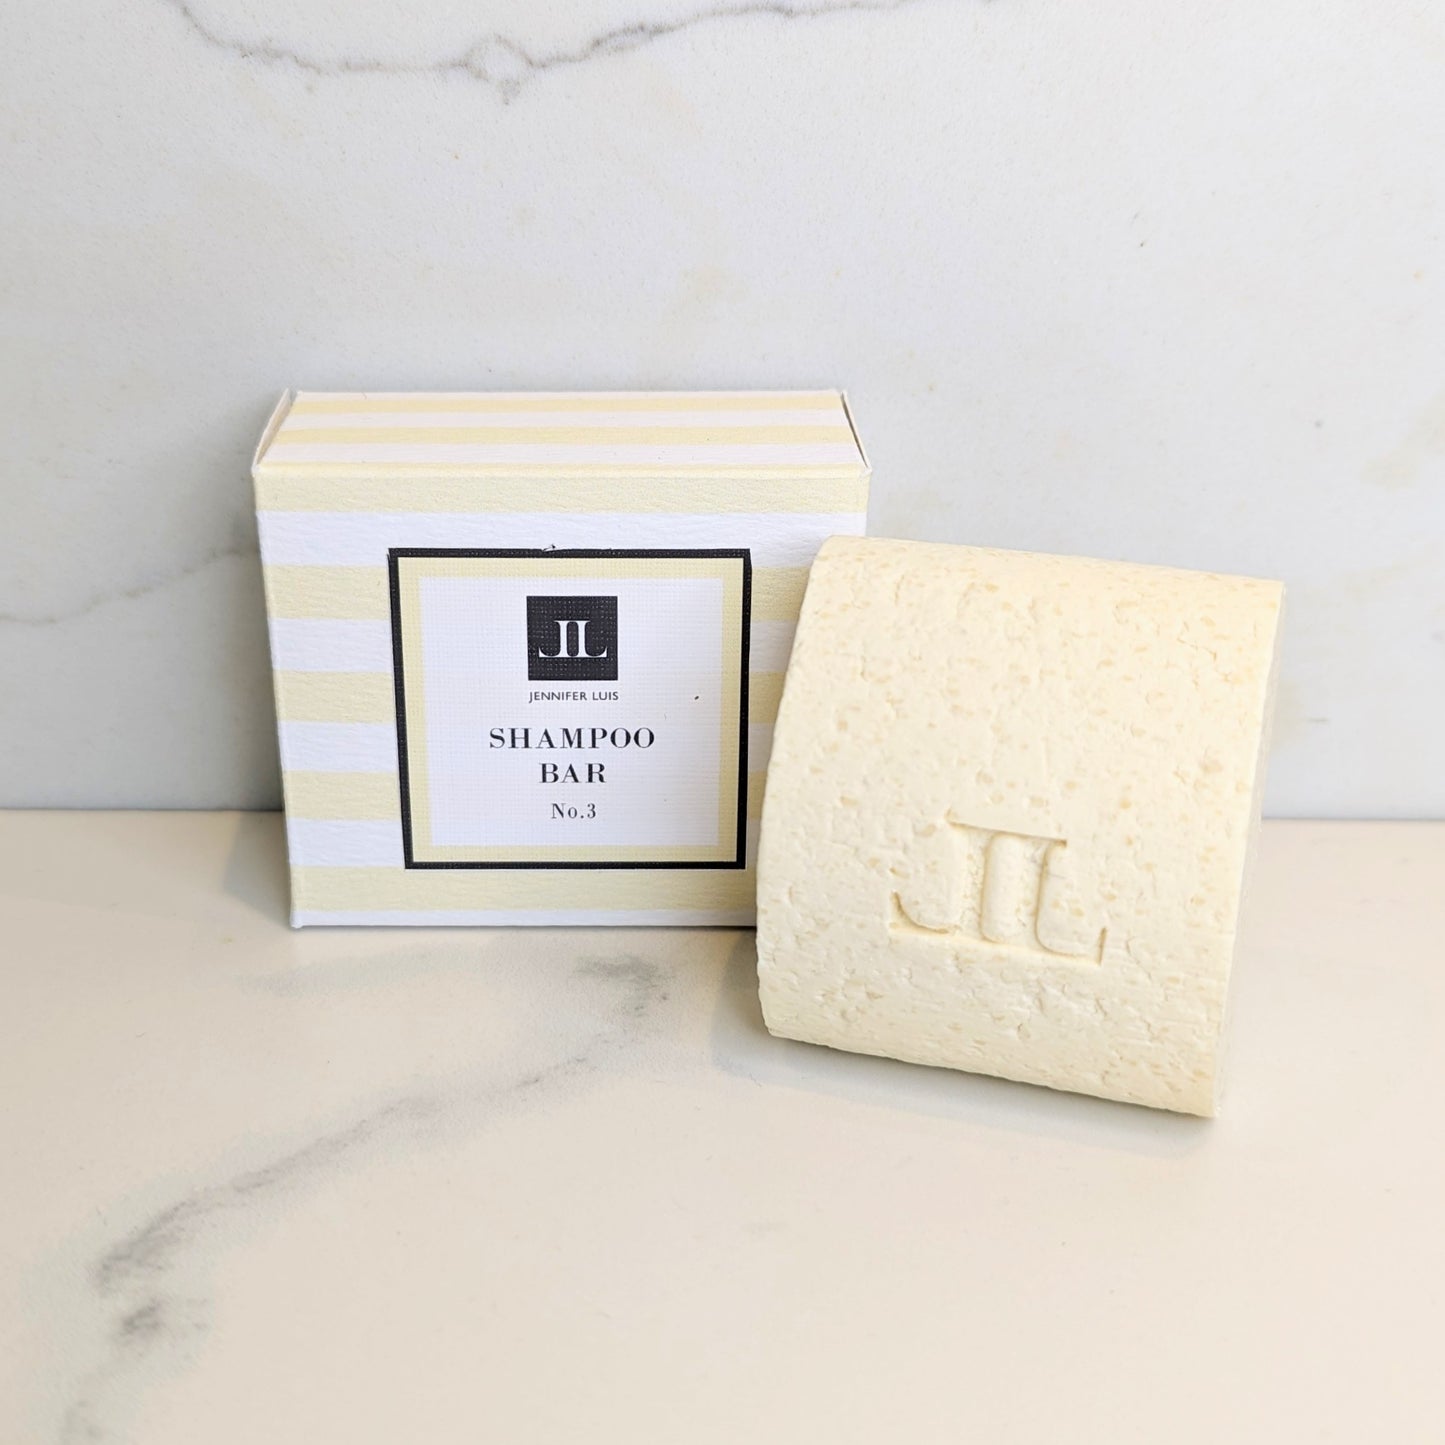 Shampoo bar for oily, fine, lacking in volume hair